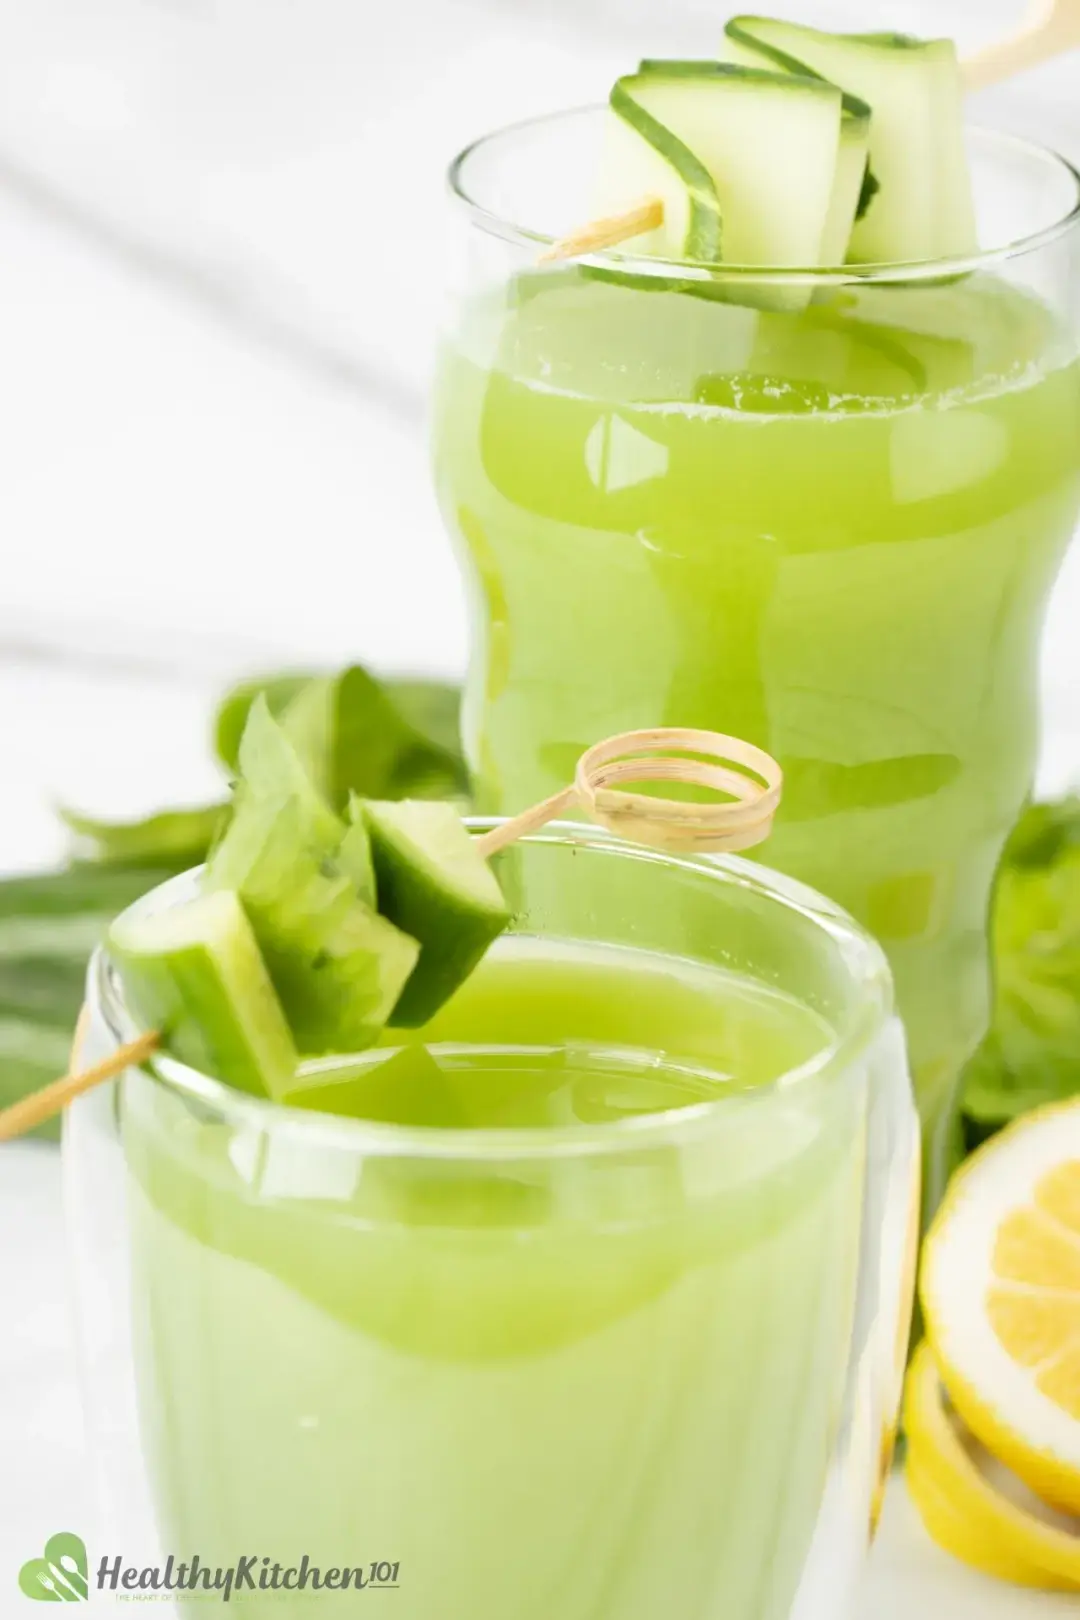 Two glasses of cucumber celery drink, each with a skewered strand of cucumber slice on top